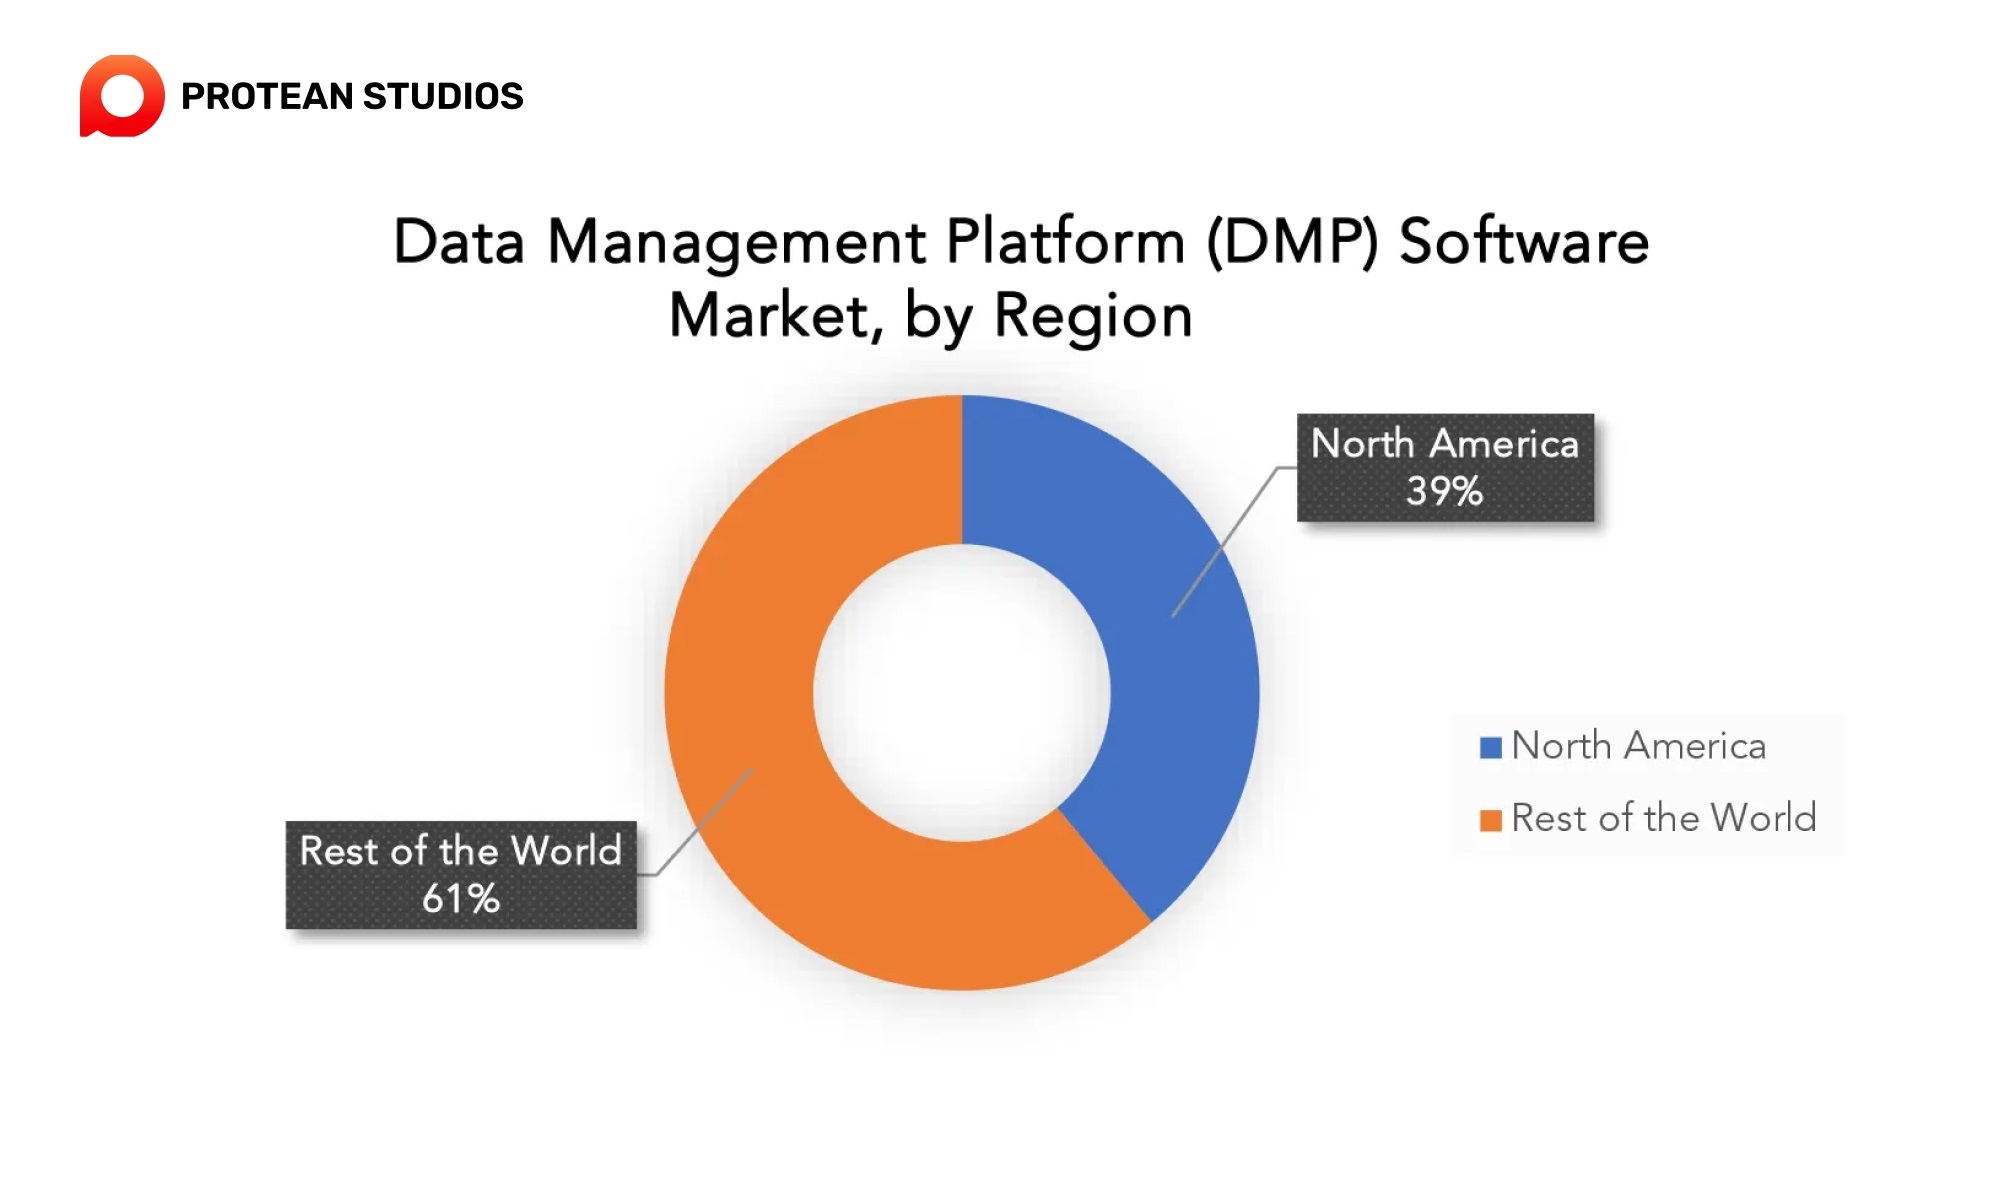 North America takes up a large DMP share